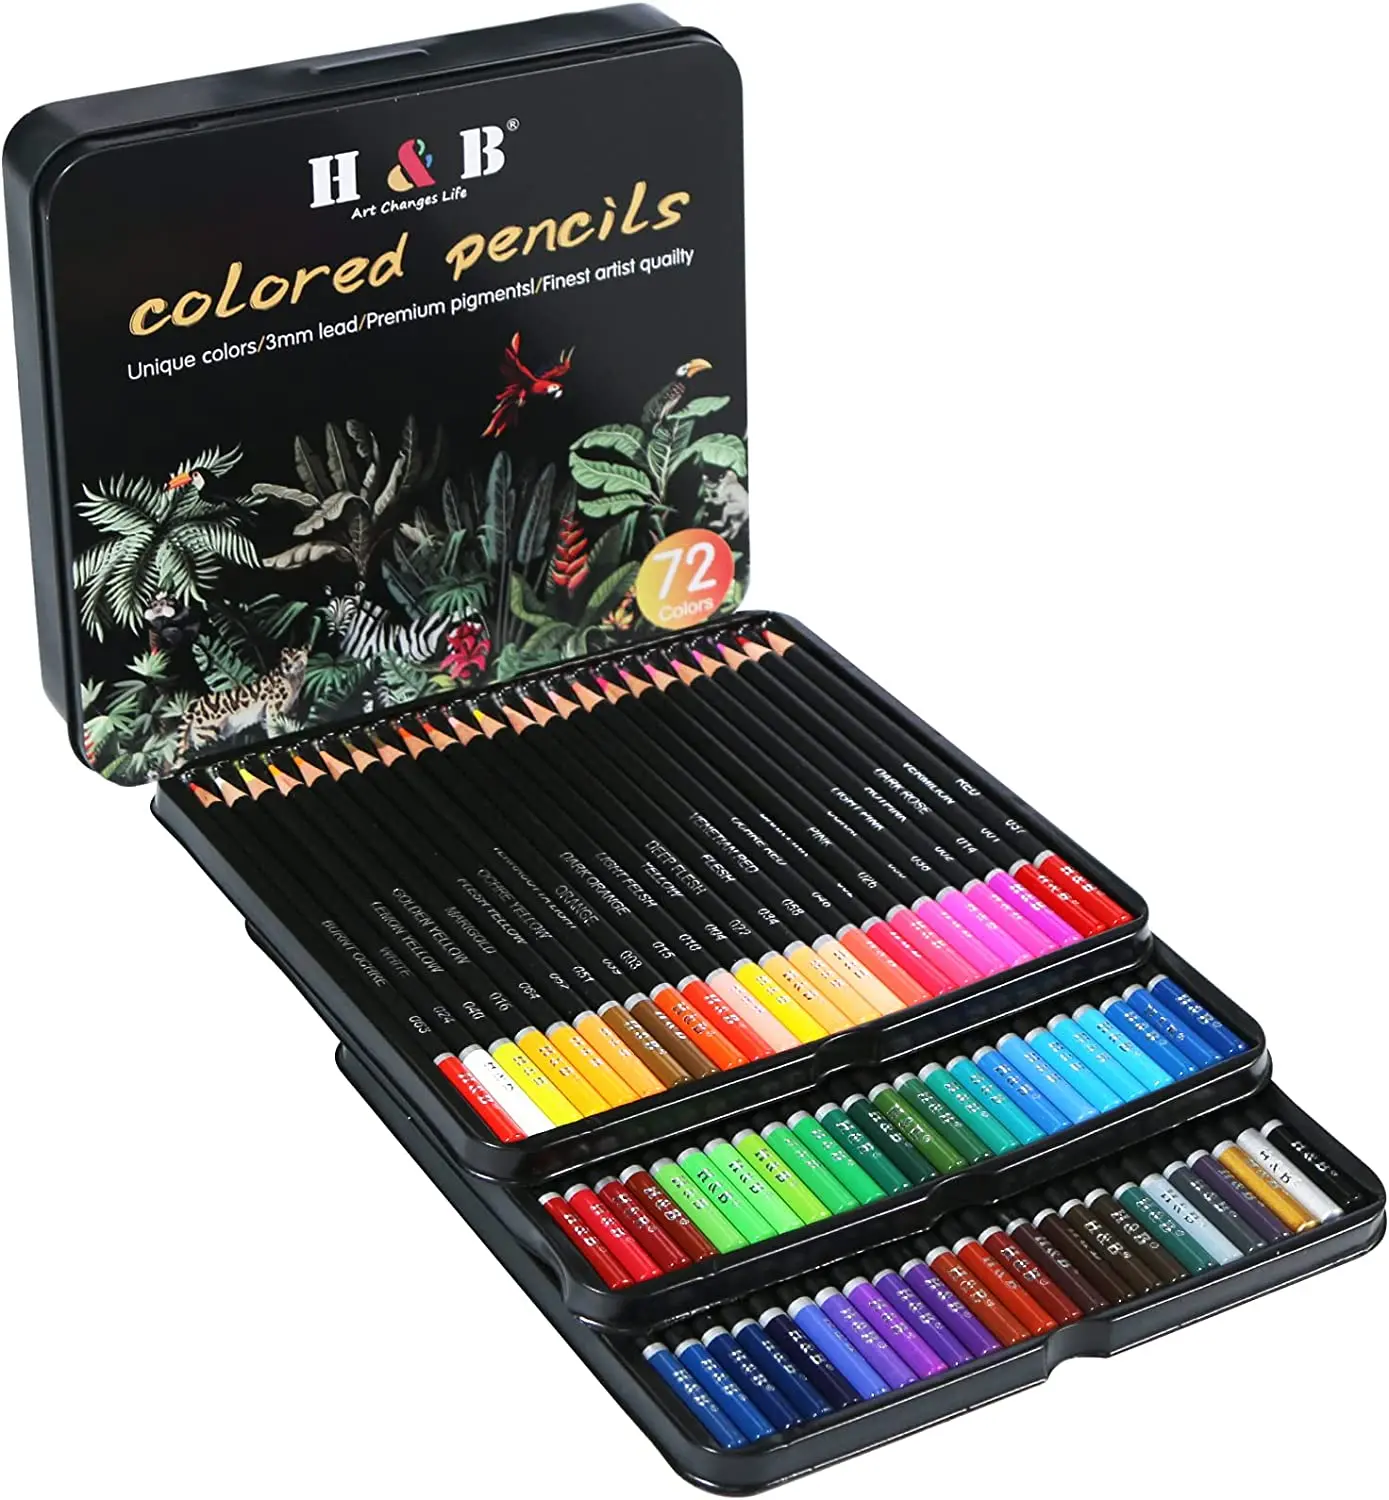 Colored Pencils,Drawing Pencil Set Oil Based Color Pencils Professional Colouring Pencils for Adults Beginners Art Supplies multipurpose oil pastel colored crayons practical art painting tool suitable for kids beginners students stationery supplies